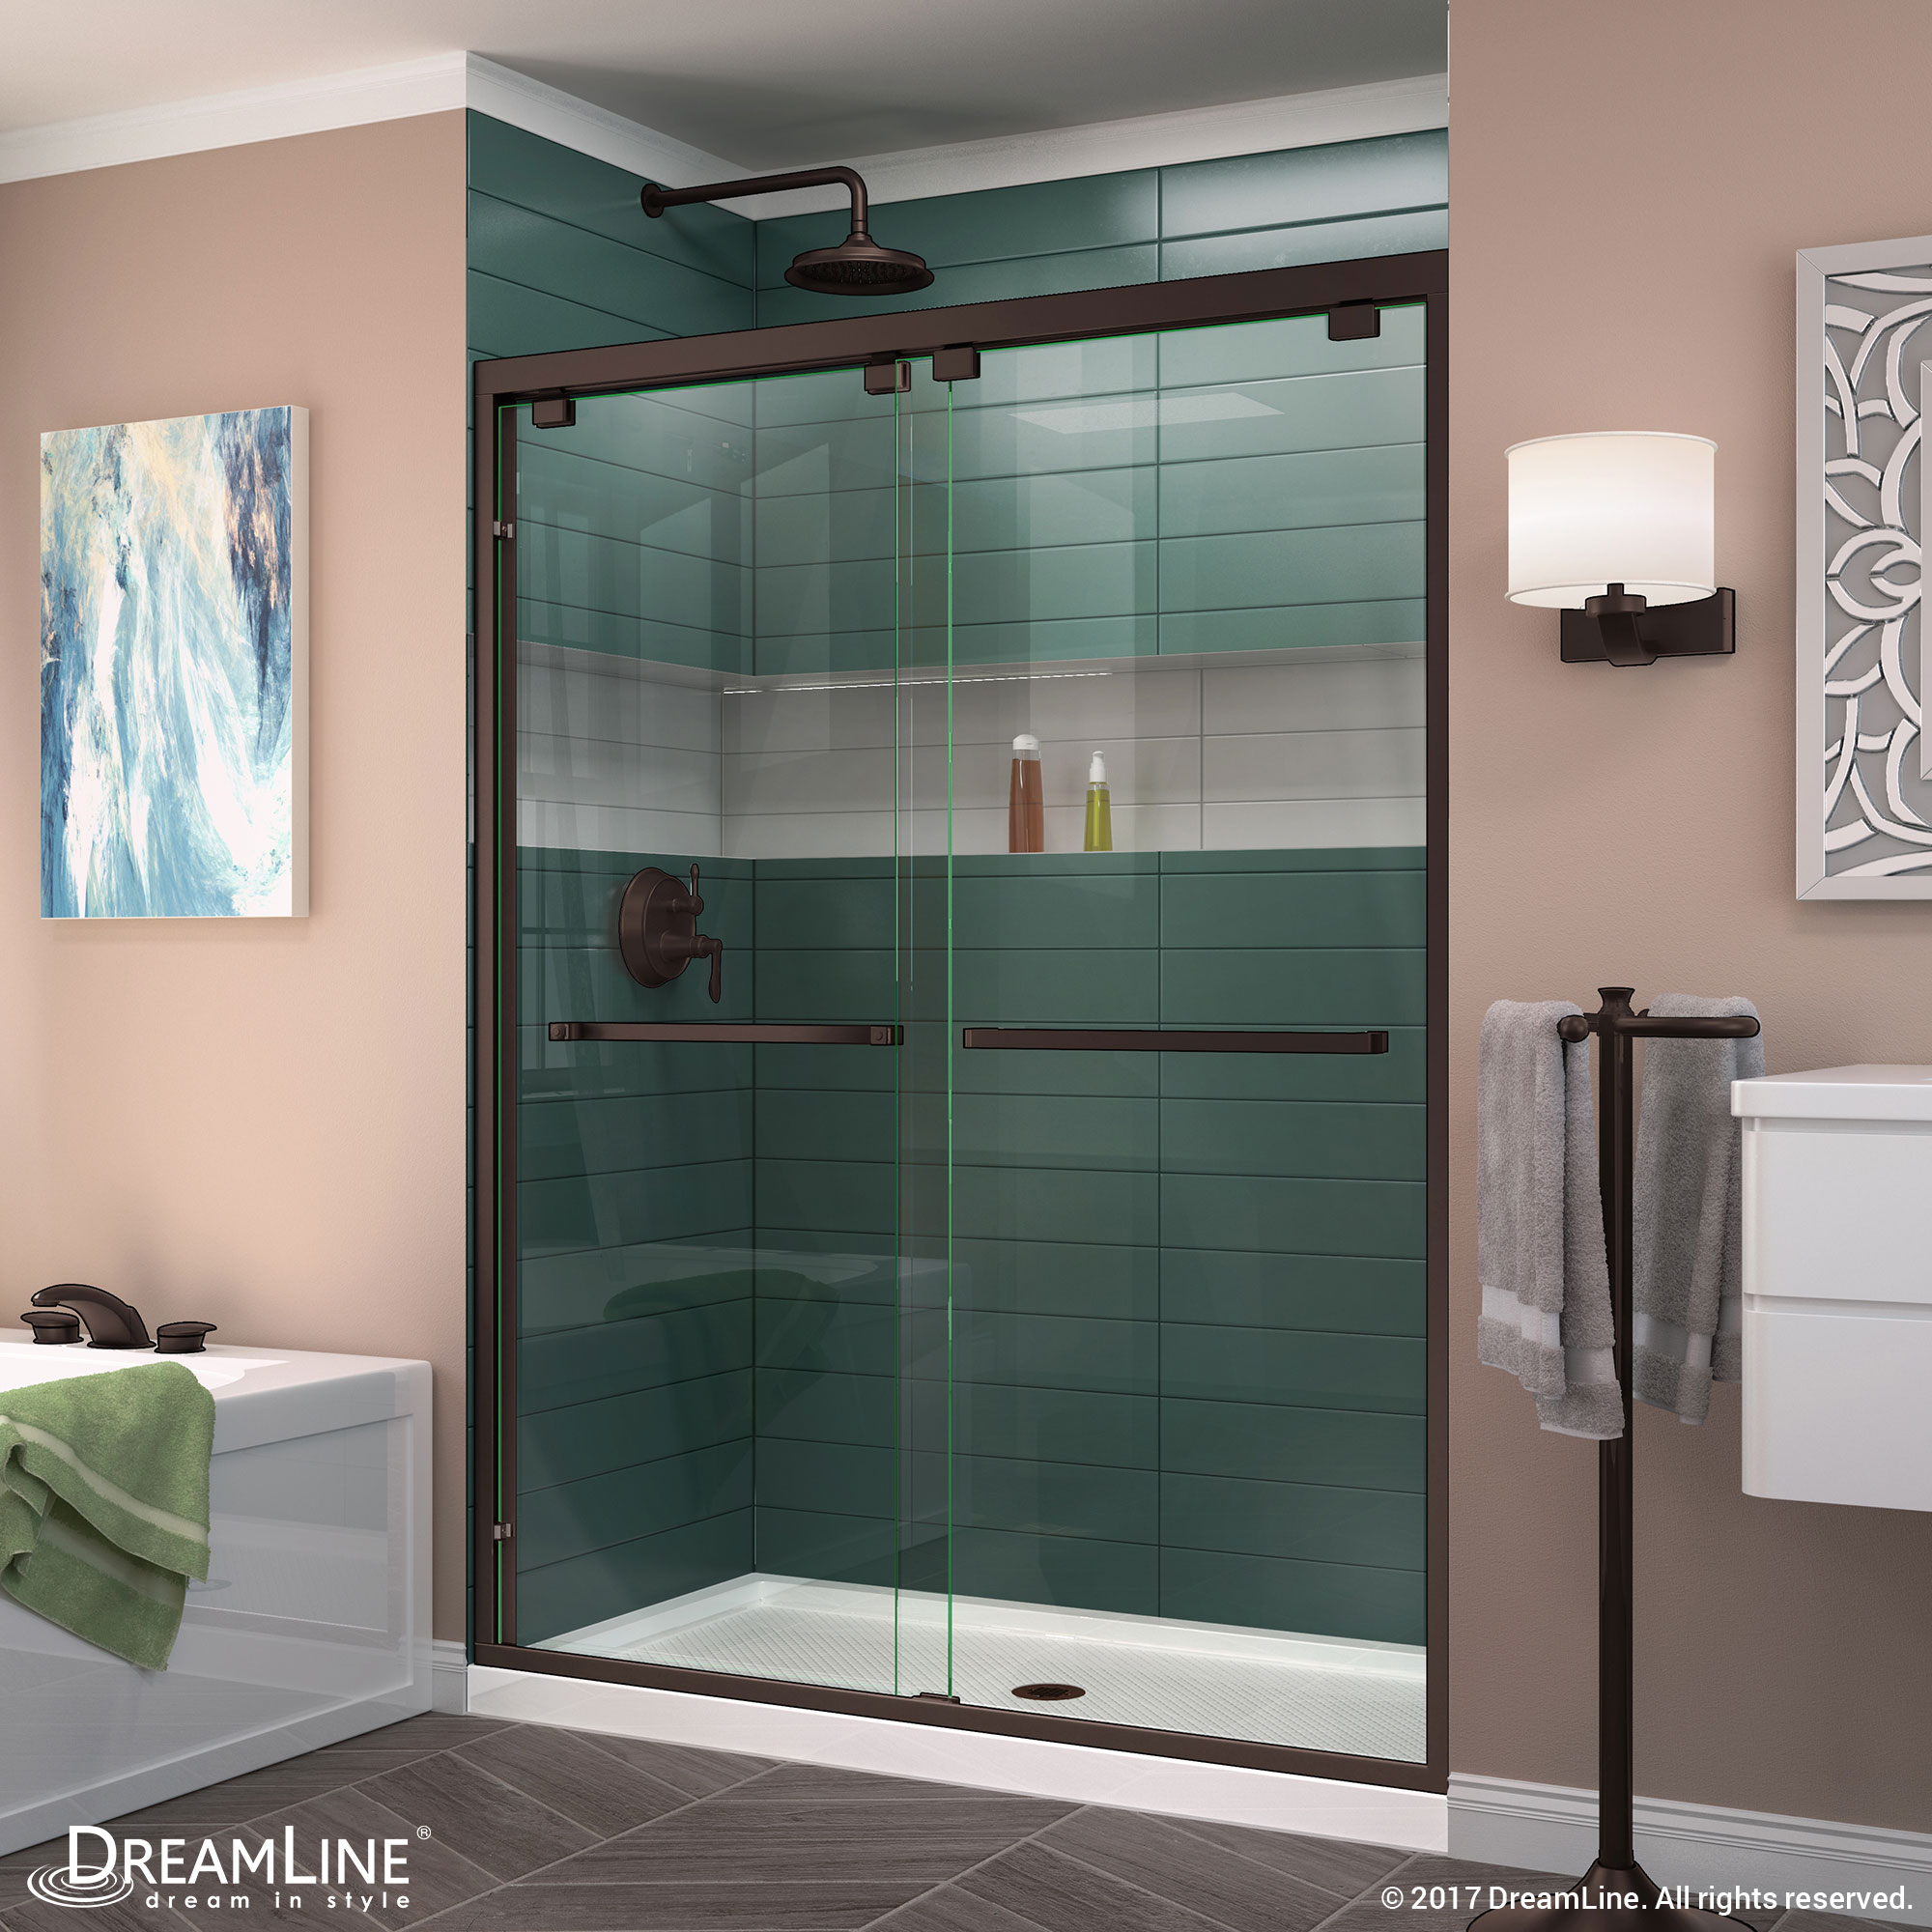 DreamLine Encore 36 in. D x 48 in. W x 78 3/4 in. H Bypass Shower Door in Brushed Nickel with Center Drain White Base Kit